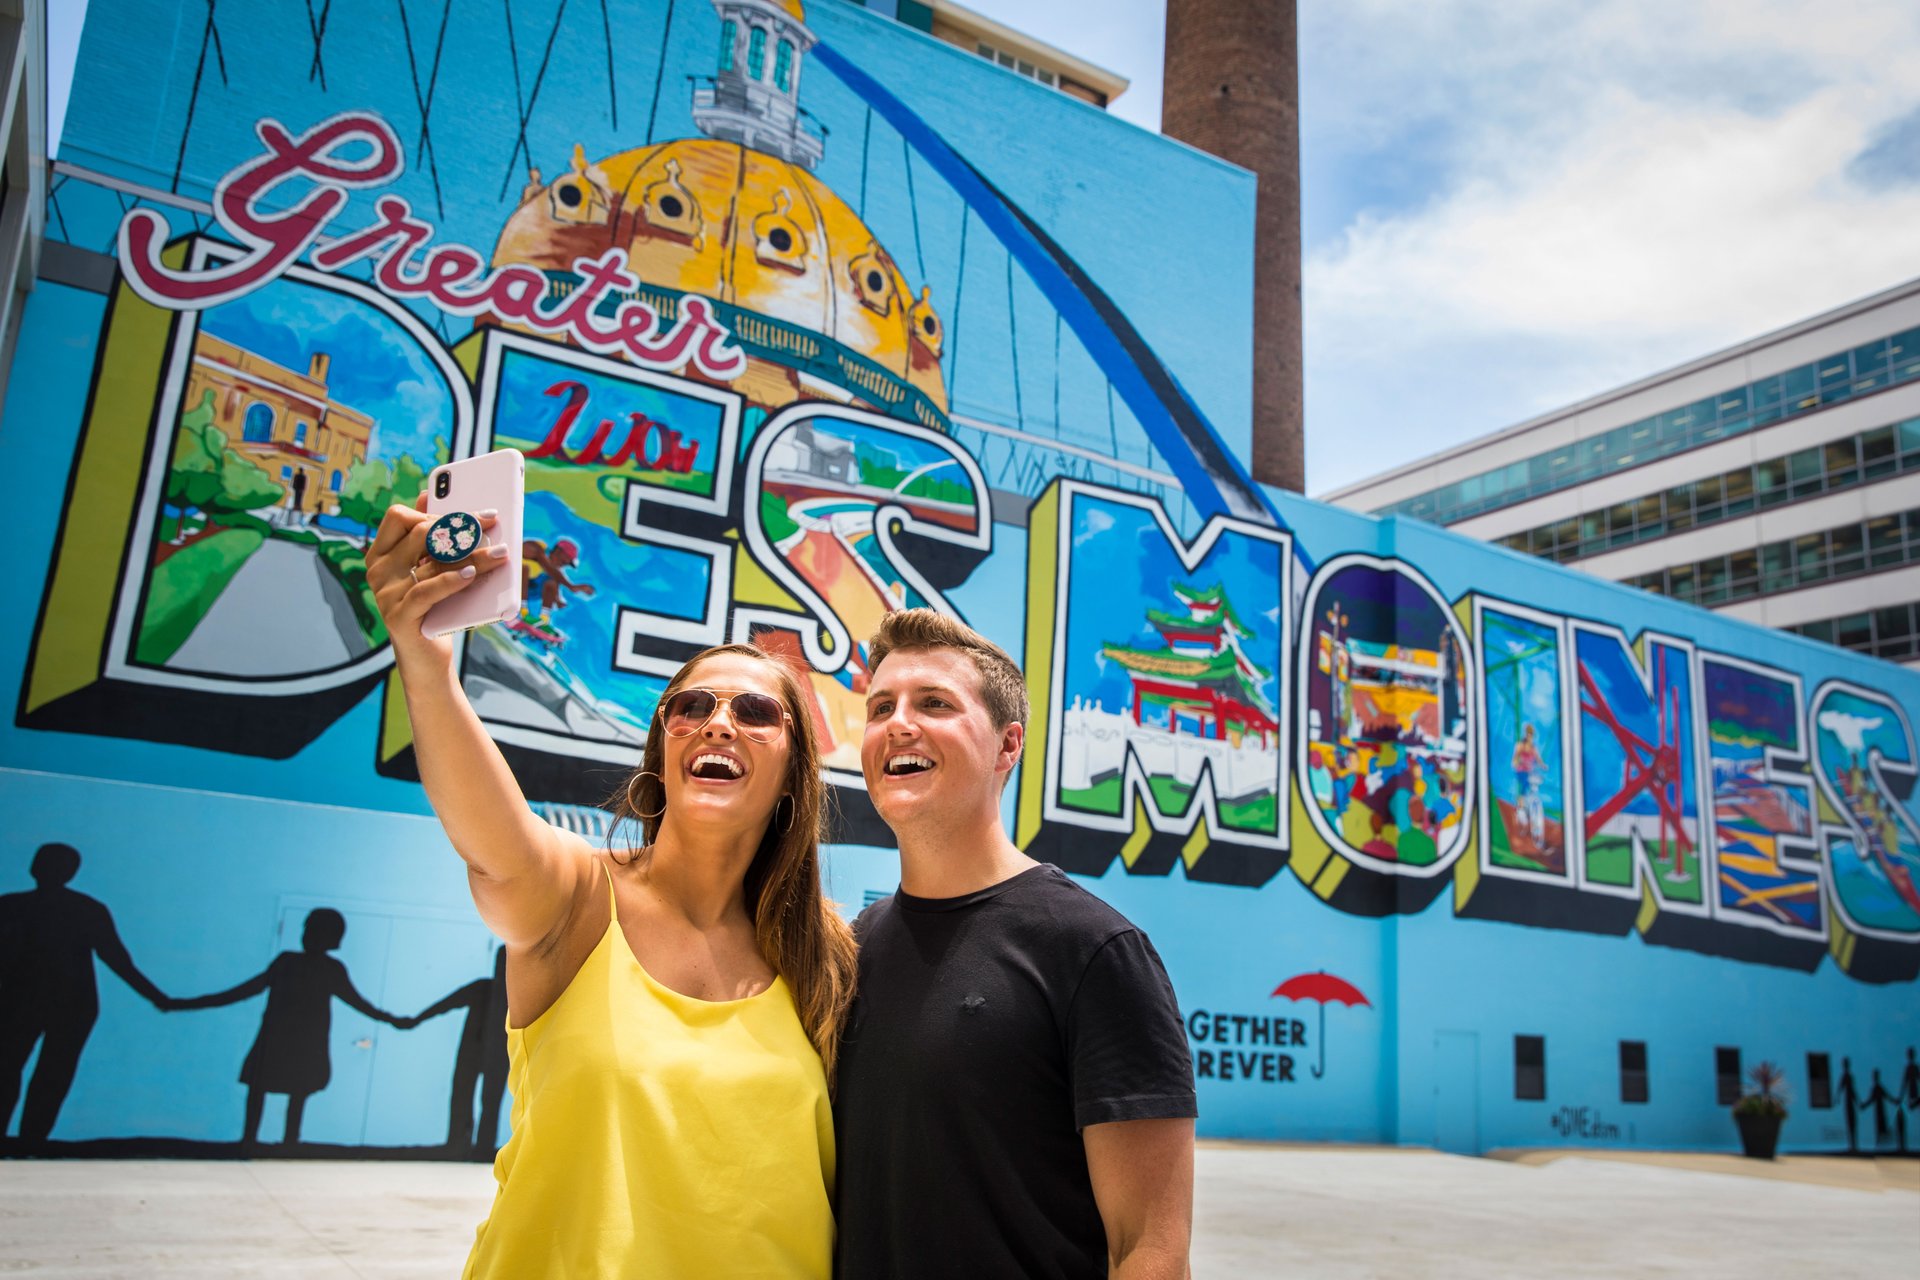 Two people take a selfie in front of a Des Moines mural